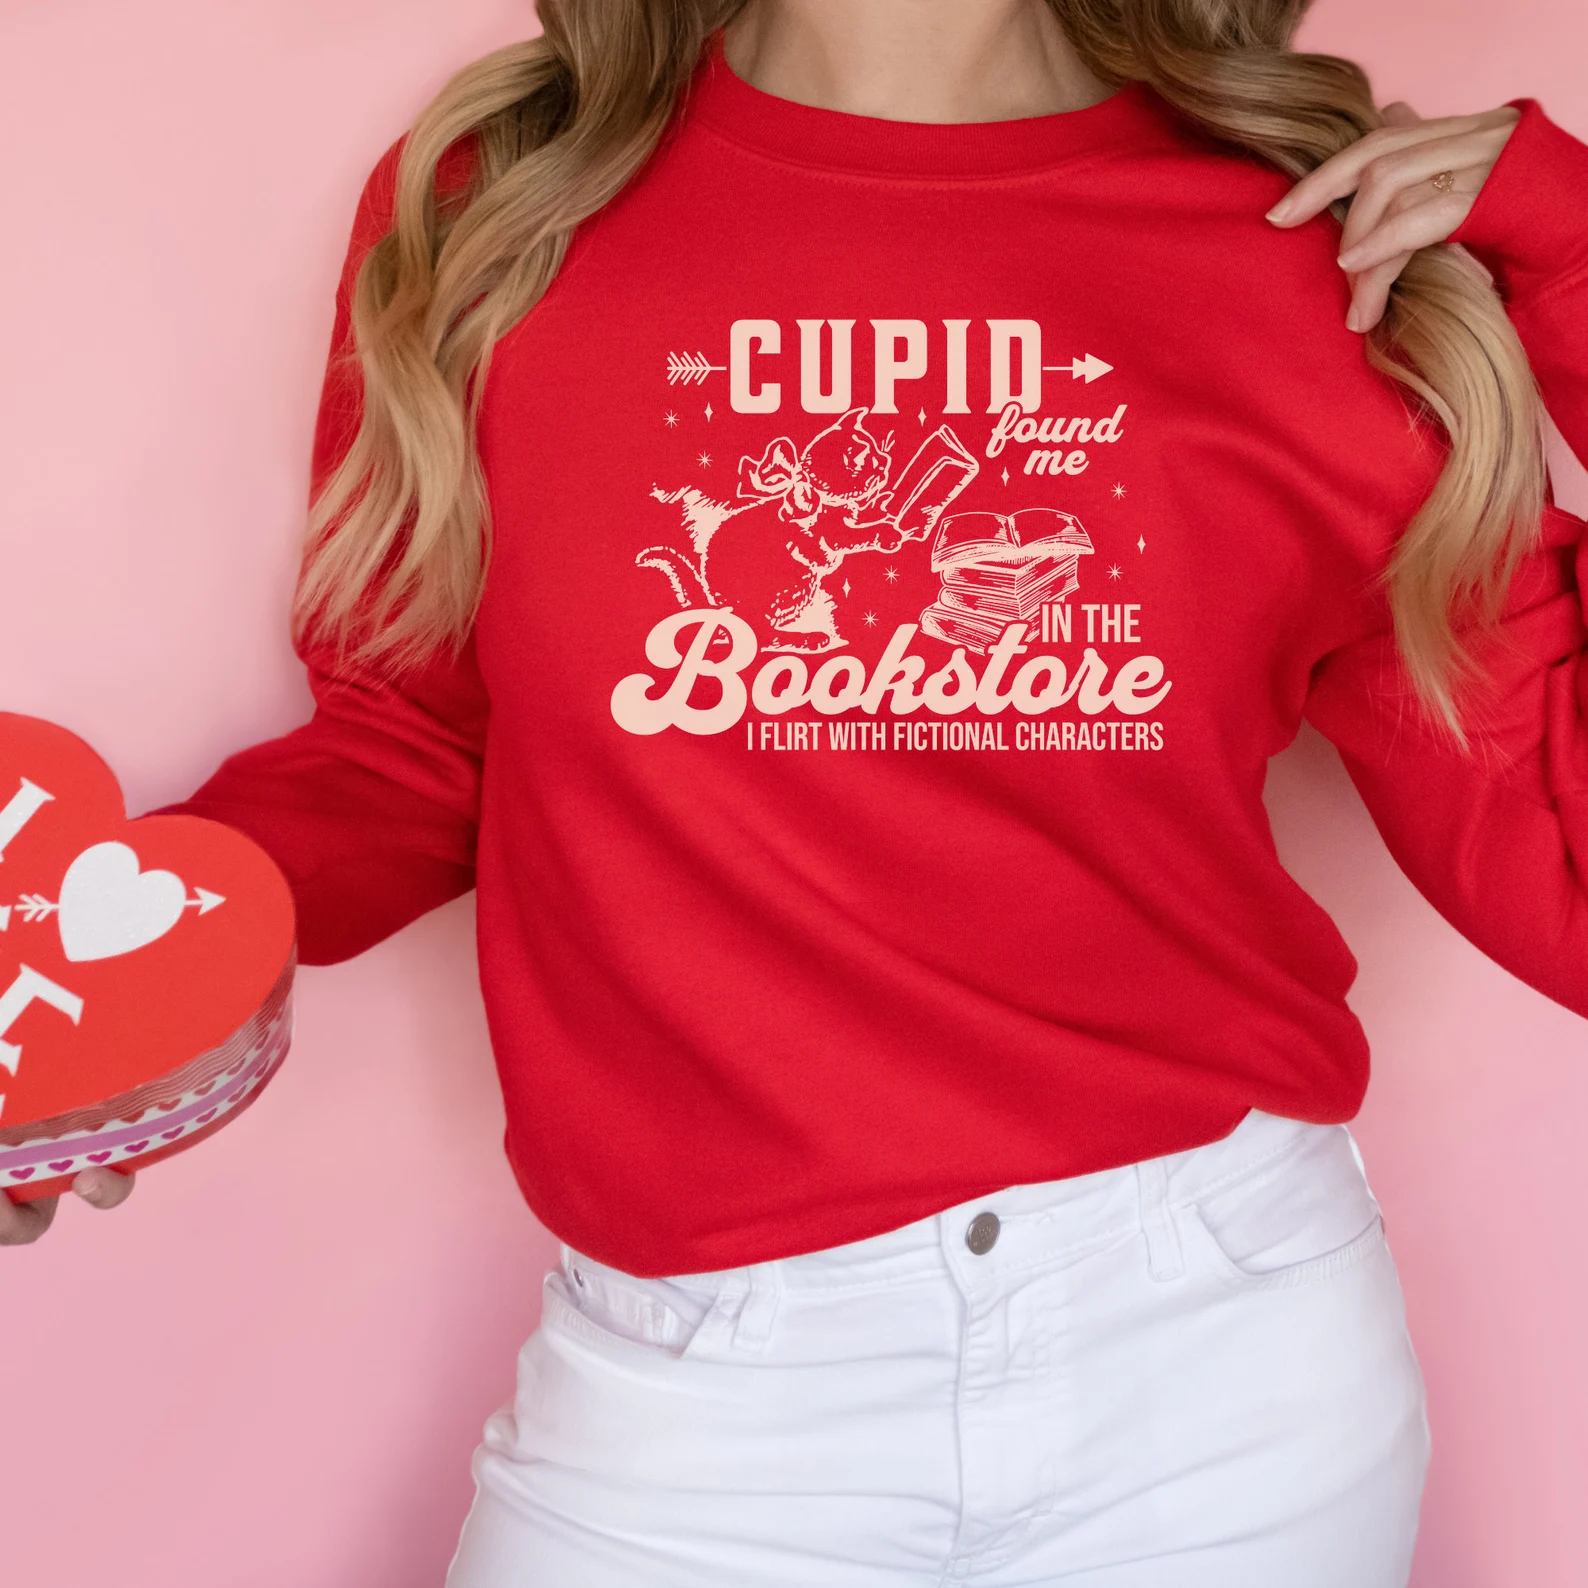 Image of a white person wearing a red  sweatshirt that says "cupid found me in the bookstore. I flirt with fictional characters."